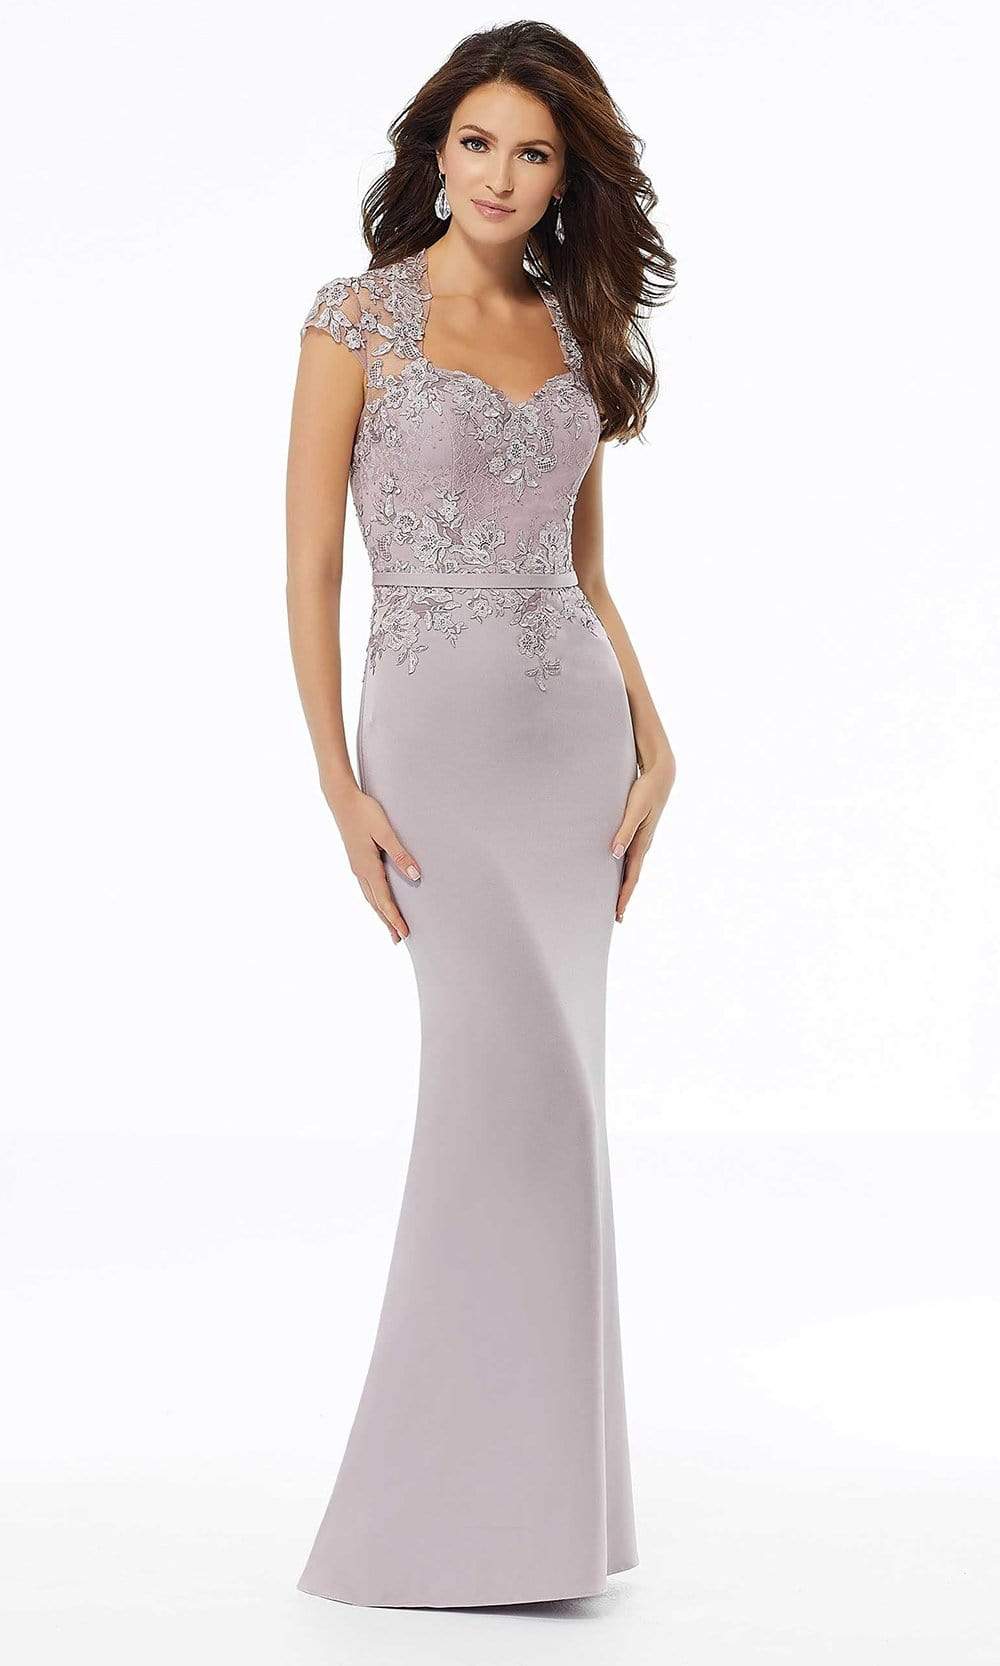 MGNY By Mori Lee - 72125 Illusion Lace Appliqued Queen Anne Dress Evening Dresses 2 / Lilac